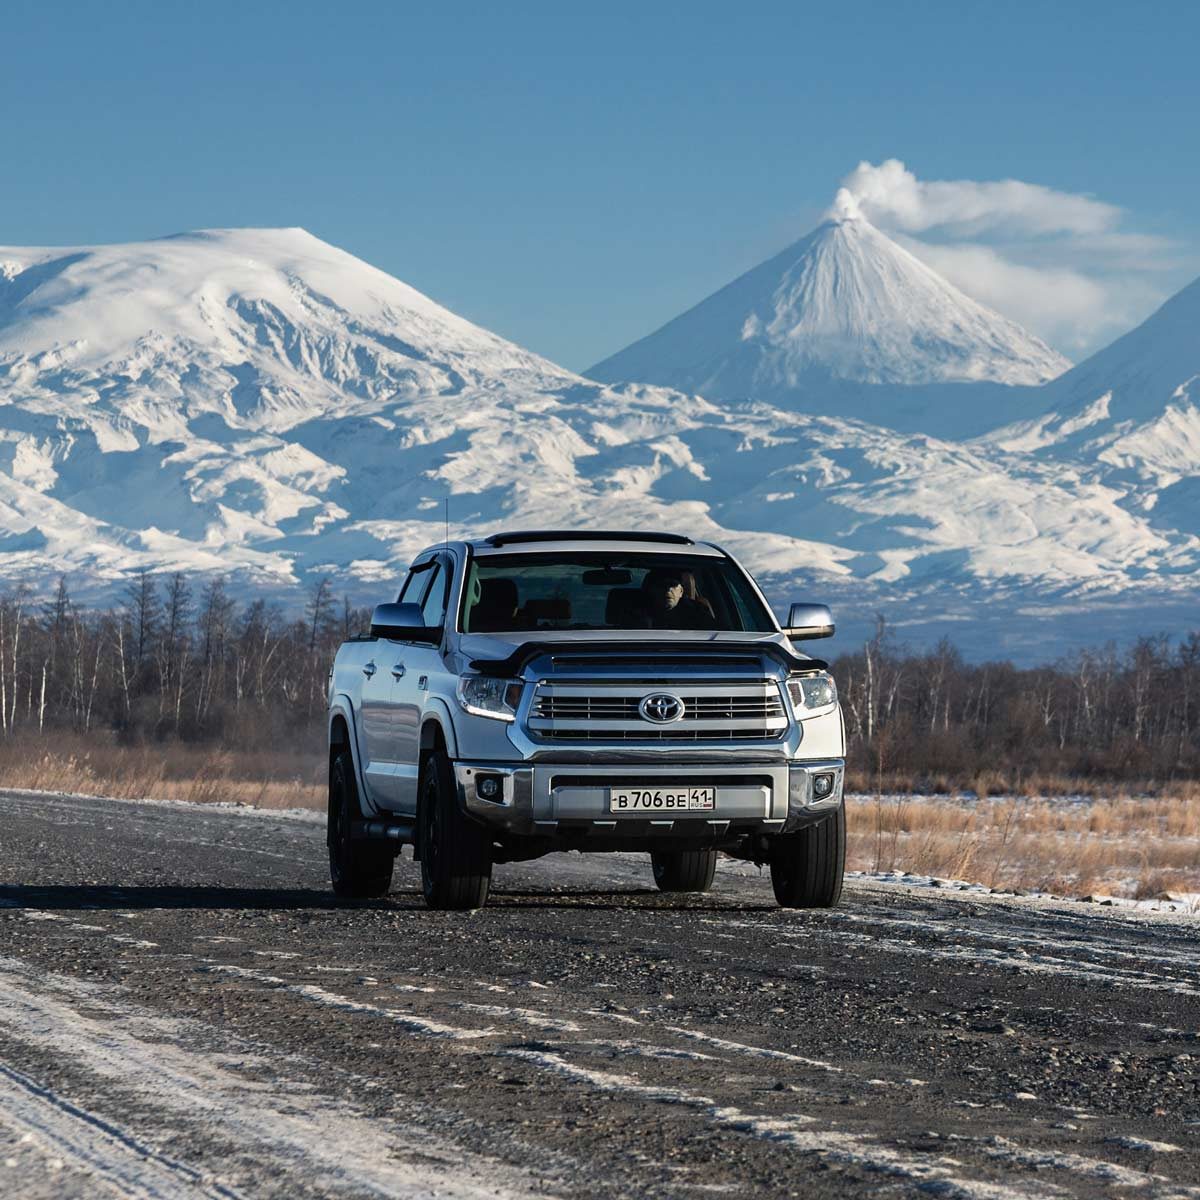 4x4 Smarts: Safe Driving Tips for How to Use 4-Wheel-Drive